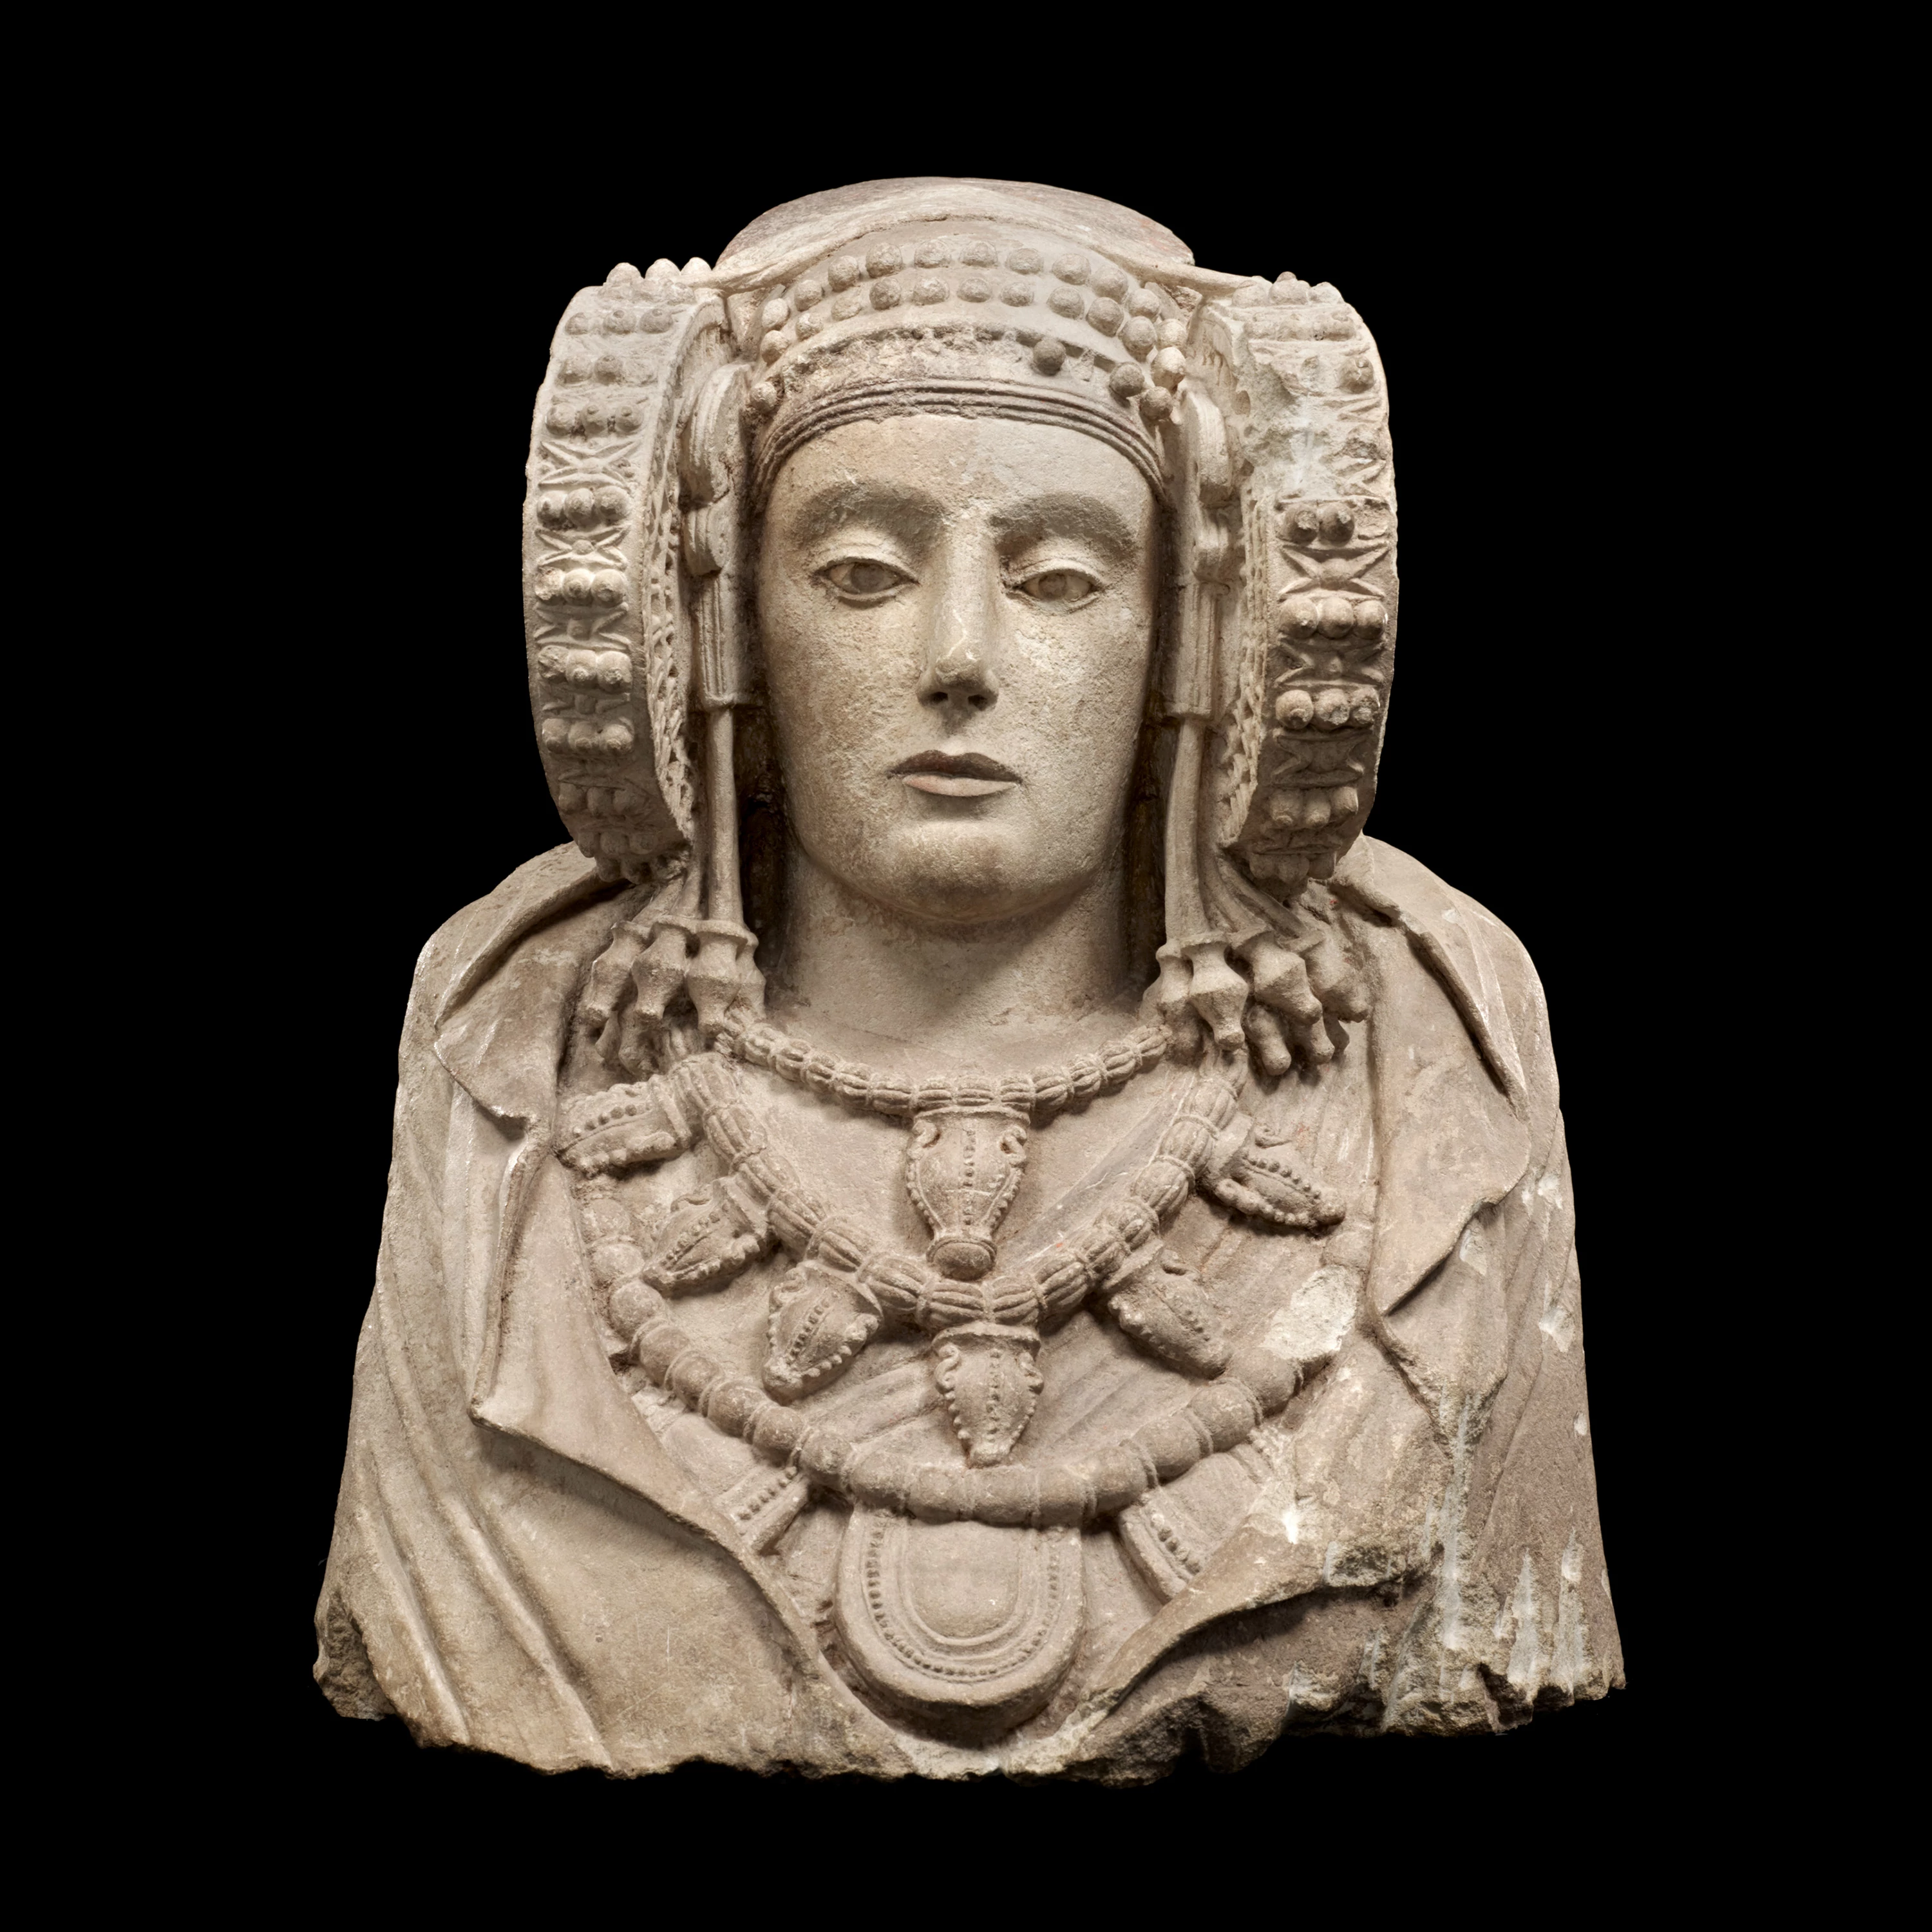 Lady of Elche, The Iberians